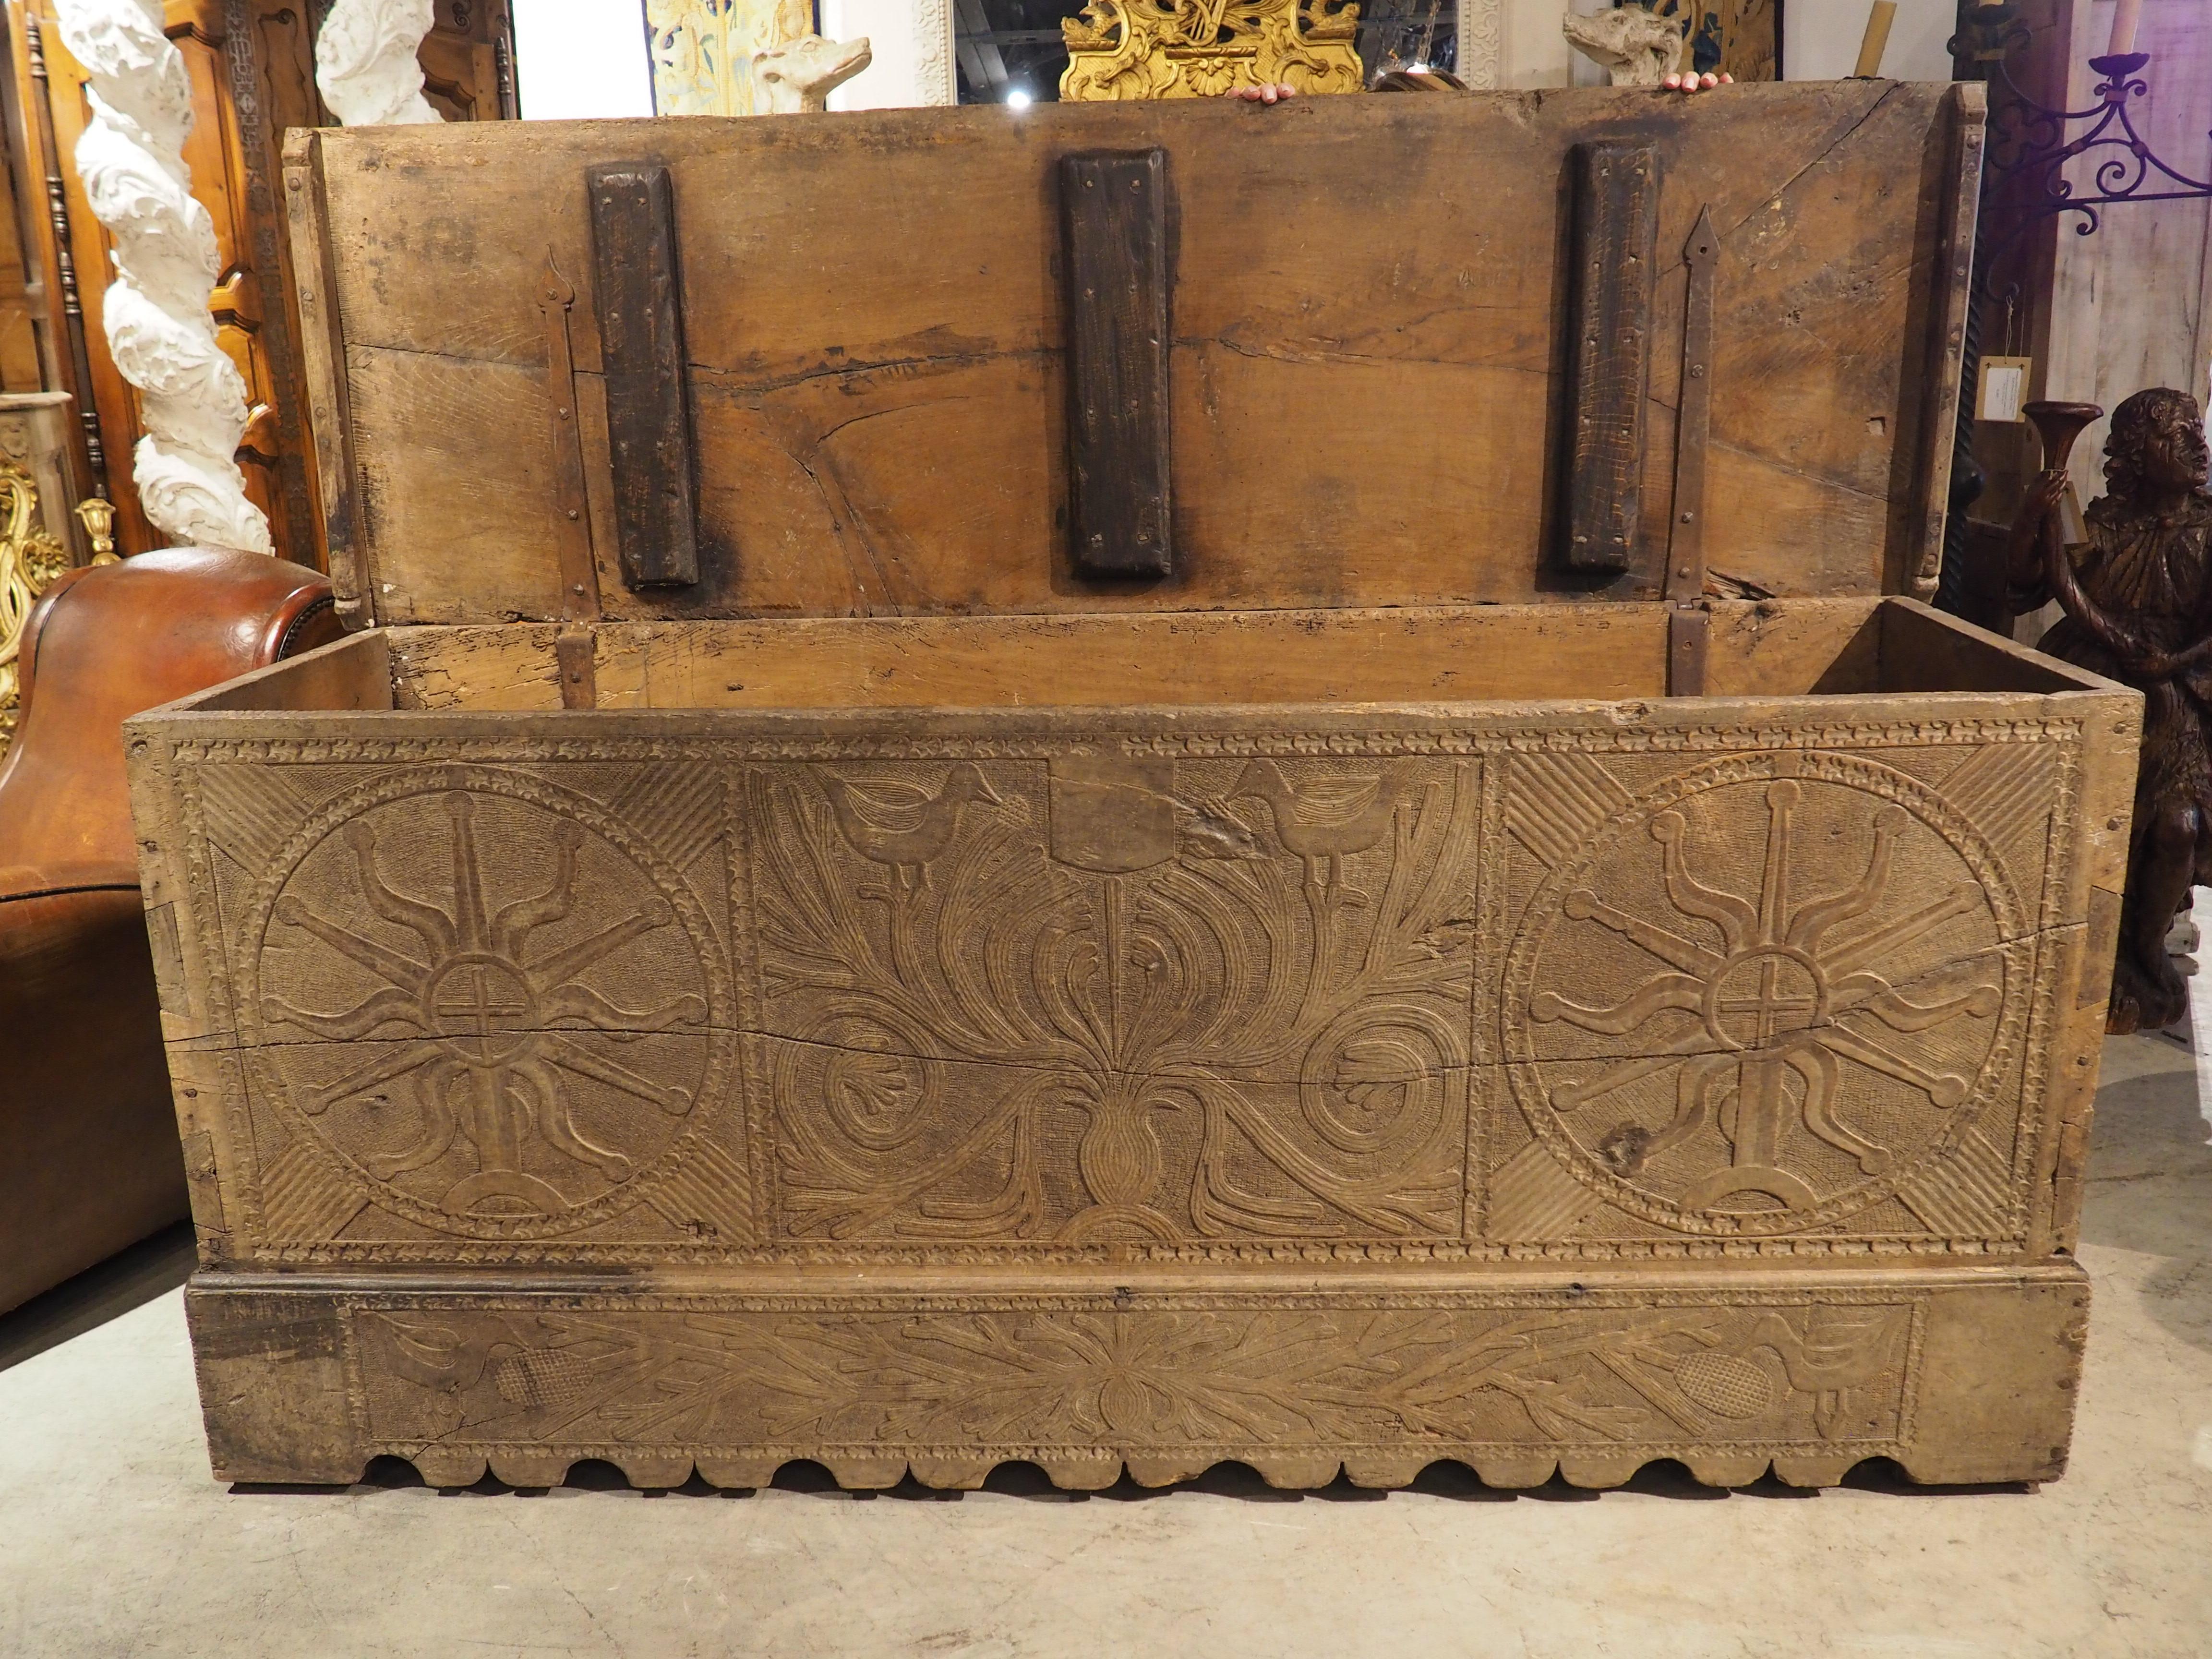 Huge Antique Carved Oak Chest or Trunk from Spain, Late 1500s to Early 1600s 6